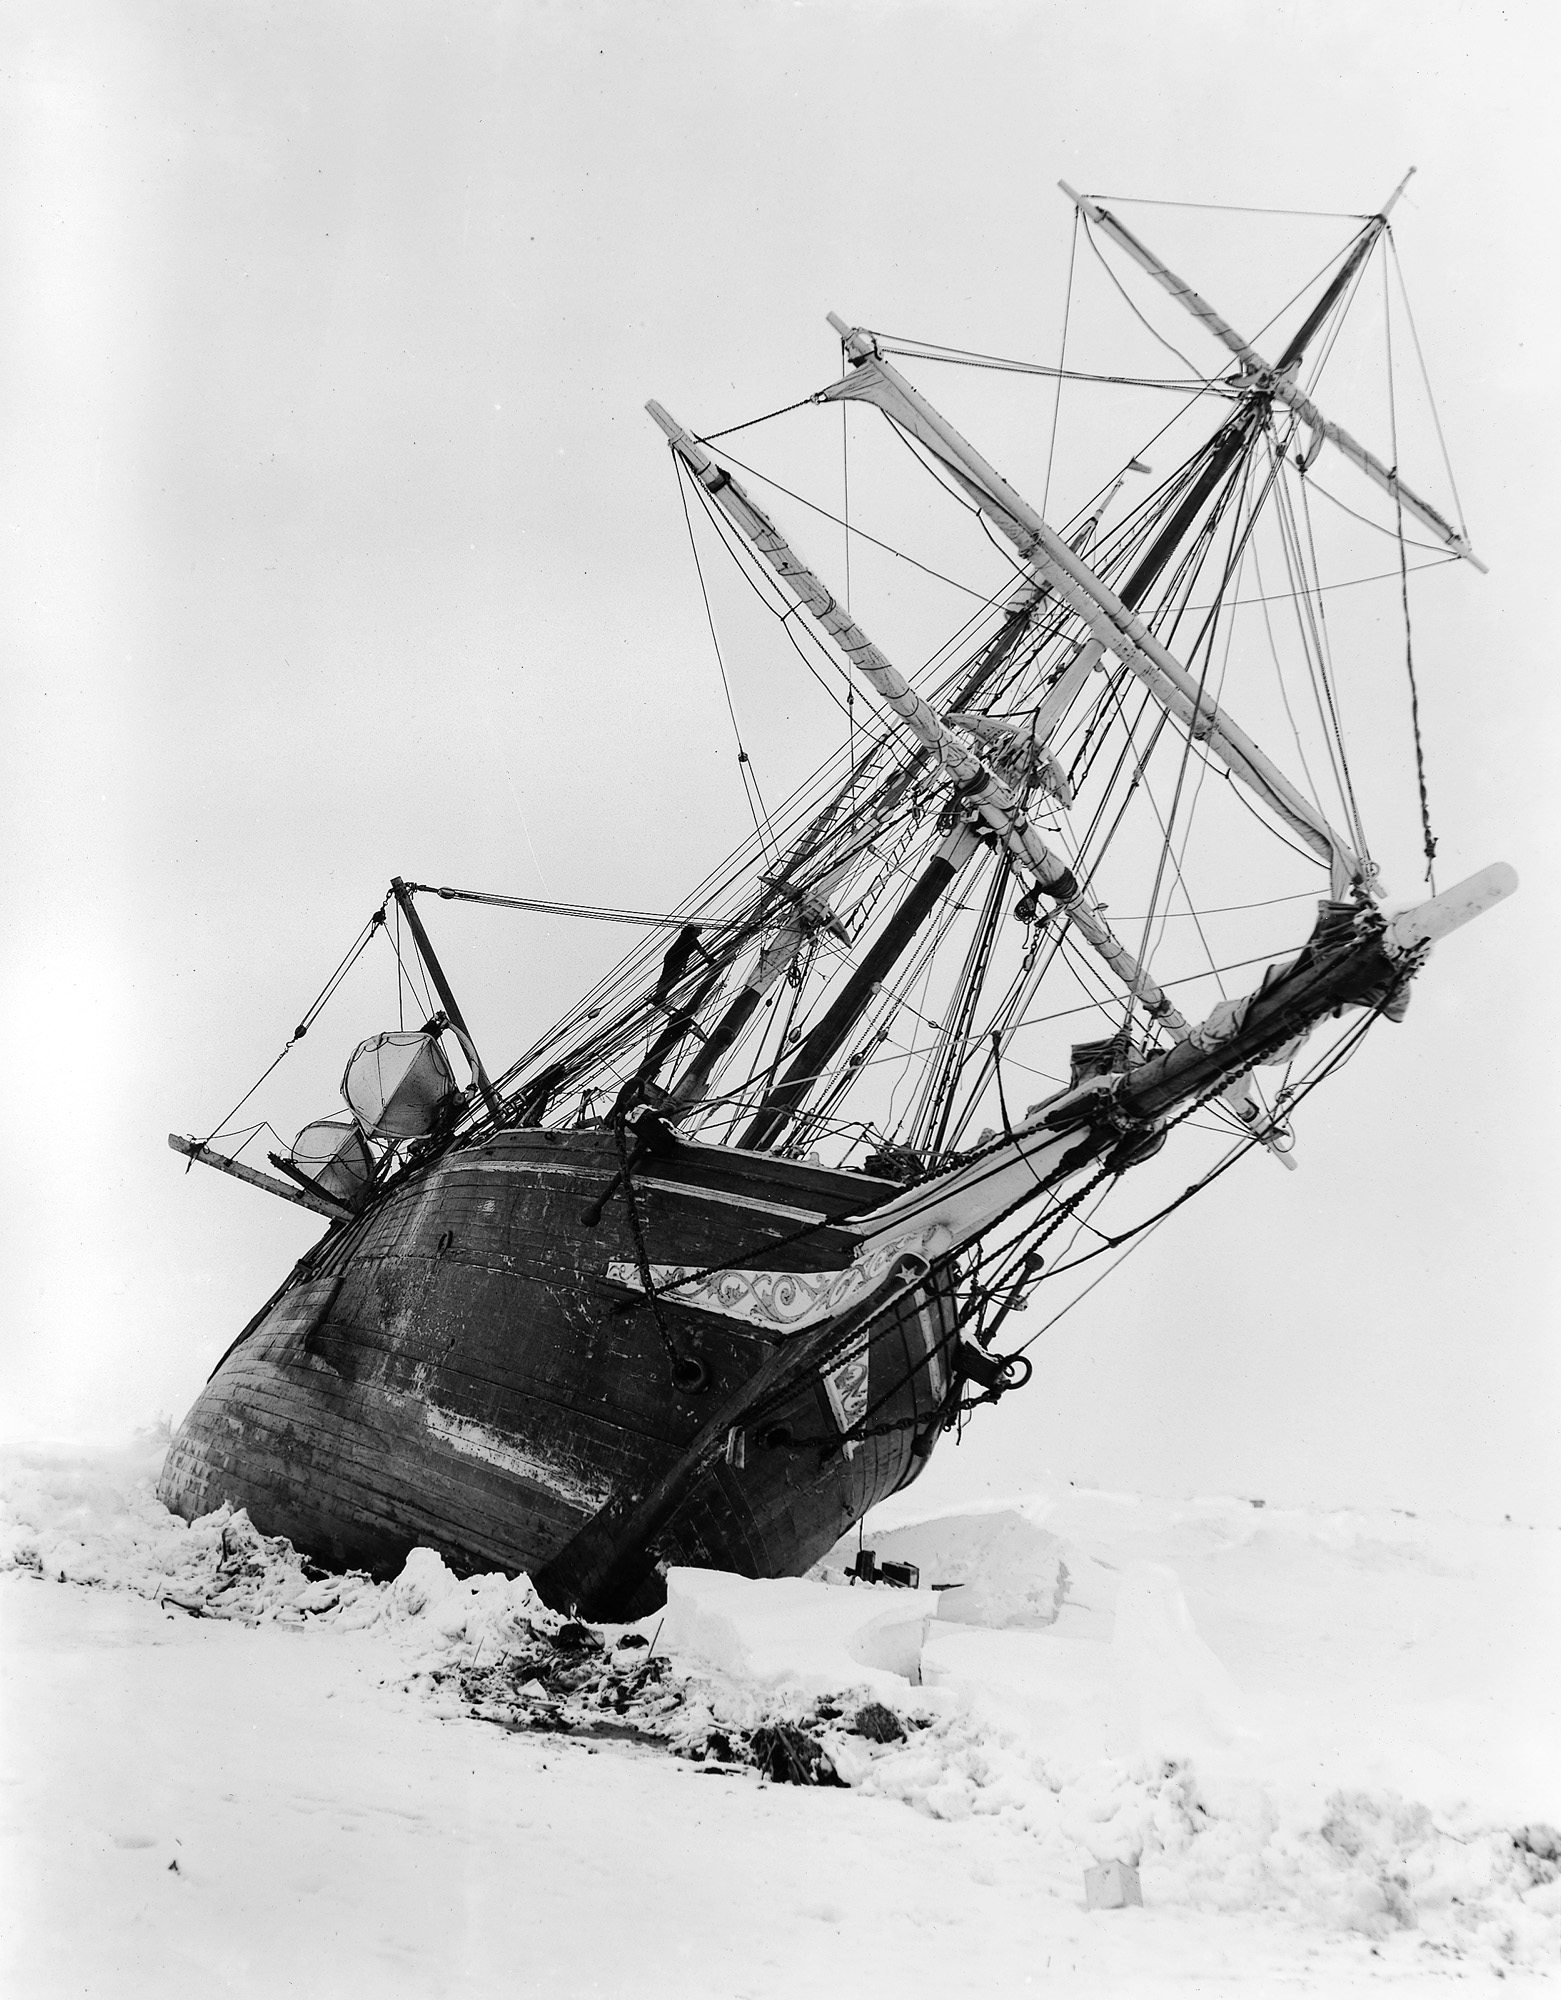 Endurance was discovered at a depth of 3,000 metres in the Weddell Sea, about 6km from where it was slowly crushed by pack ice in 1915. File photo: AP